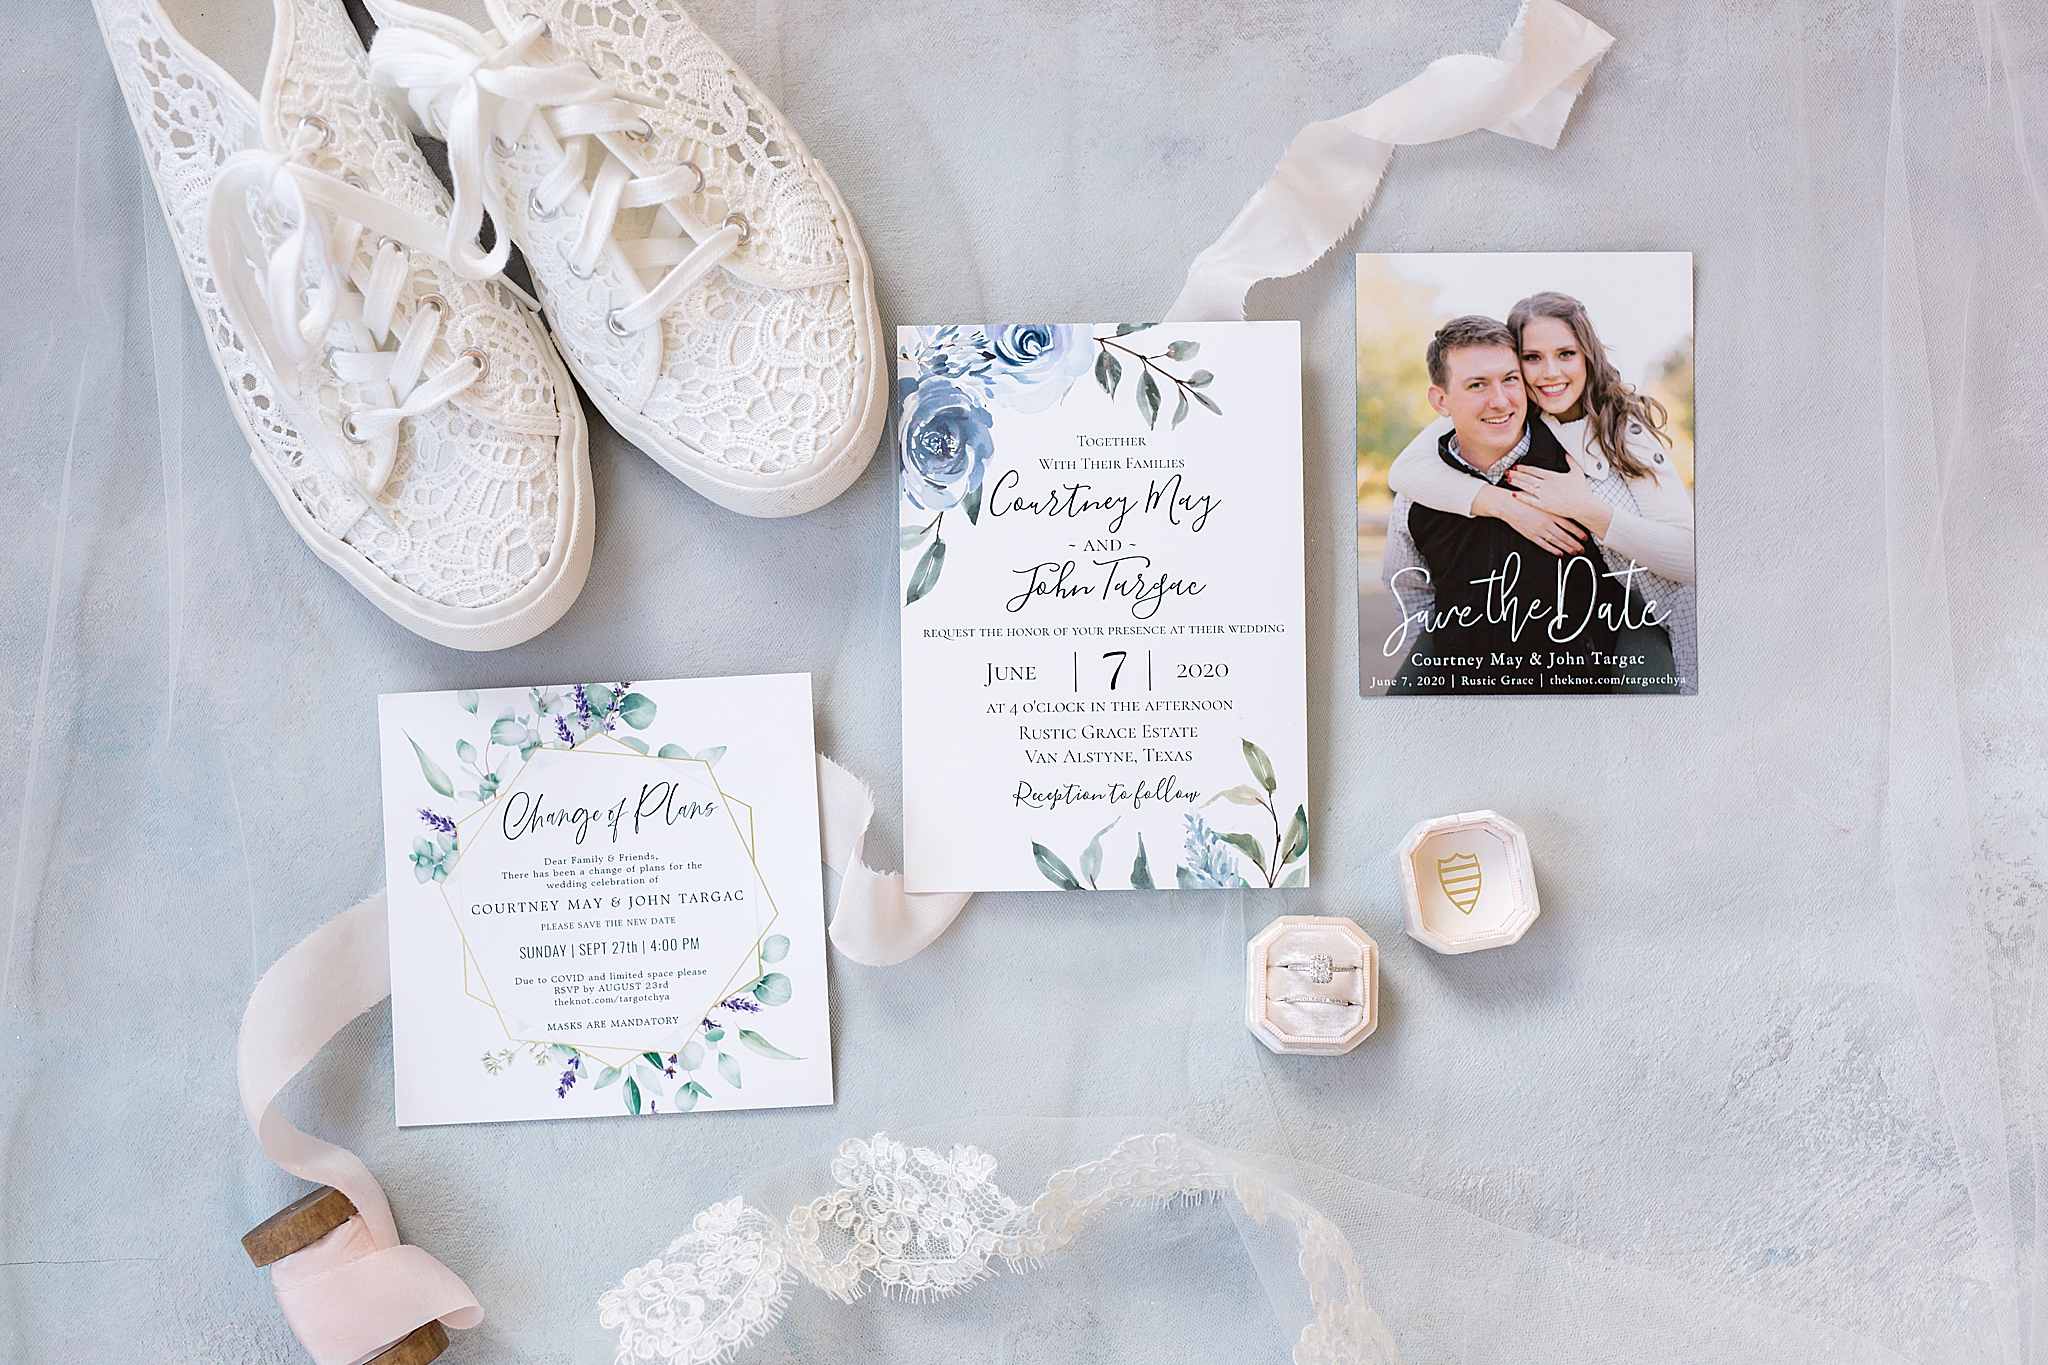 wedding invitation and date card for wedding